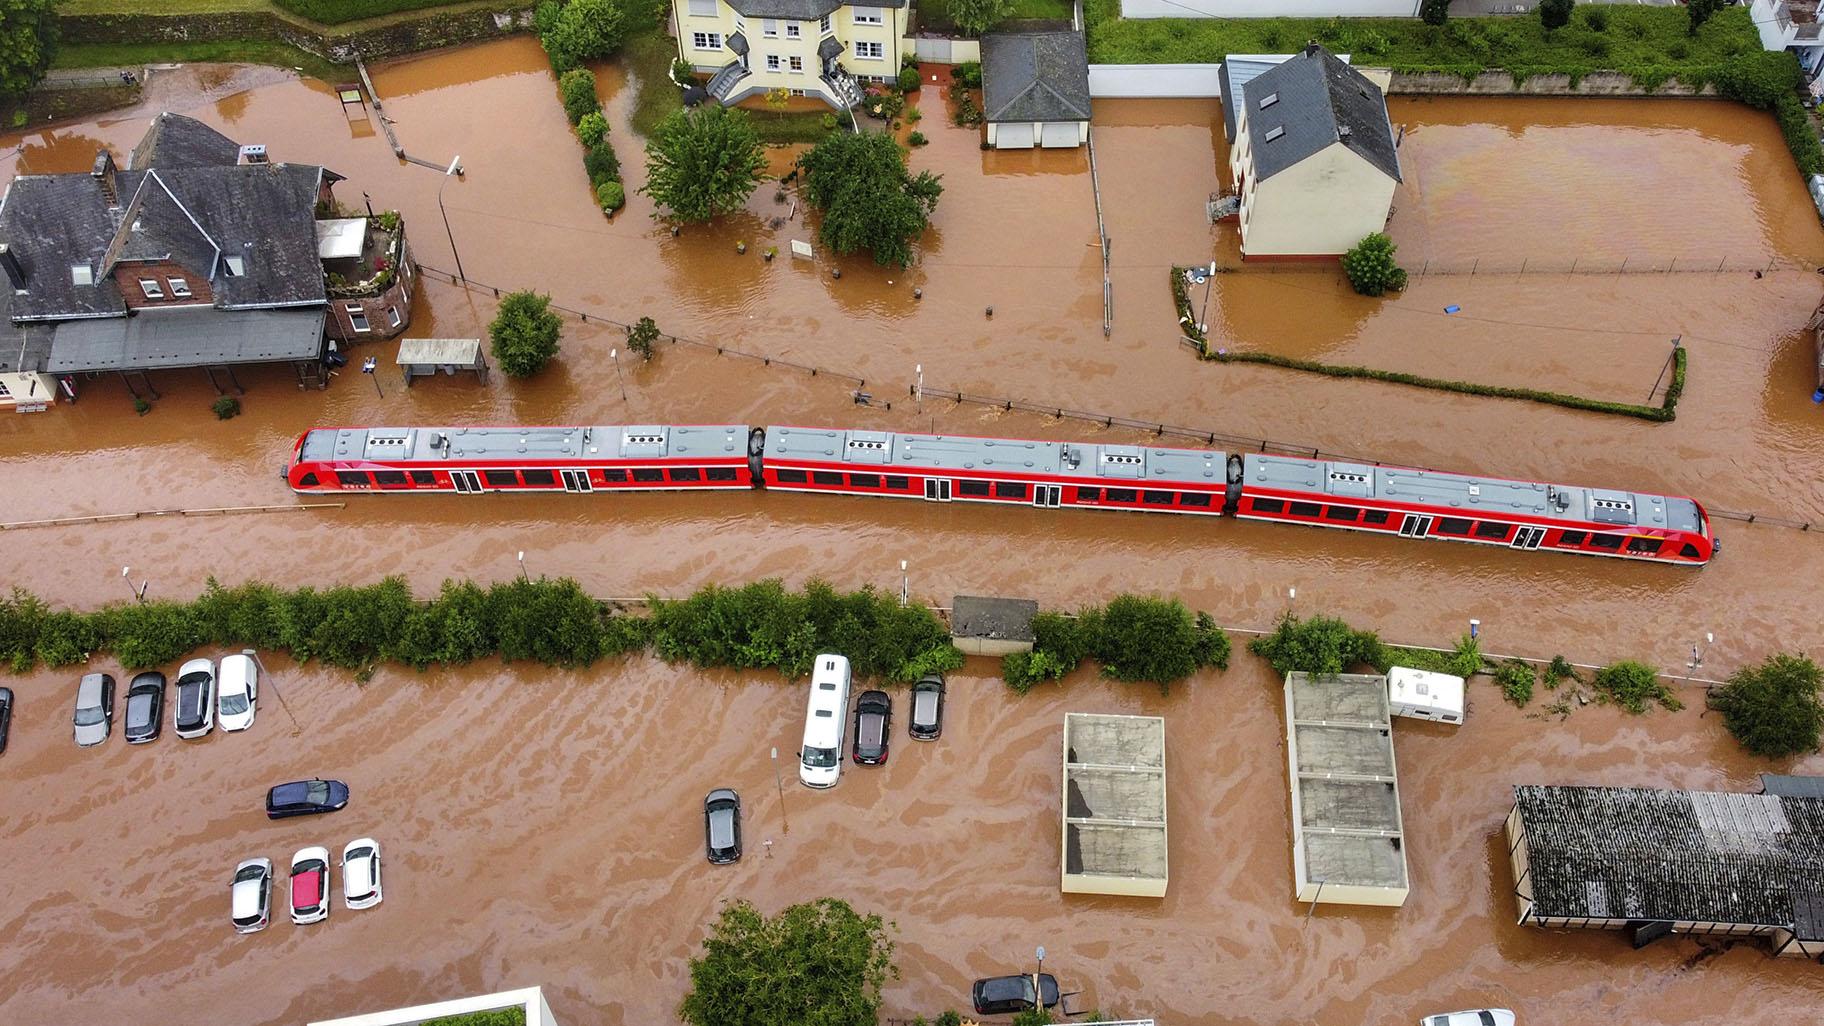 In this Thursday, July 15, 2021, 2021 file photo, a regional train in the flood waters at the local station in Kordel, Germany, after it was flooded by the high waters of the Kyll river. (Sebastian Schmitt / dpa via AP, File)